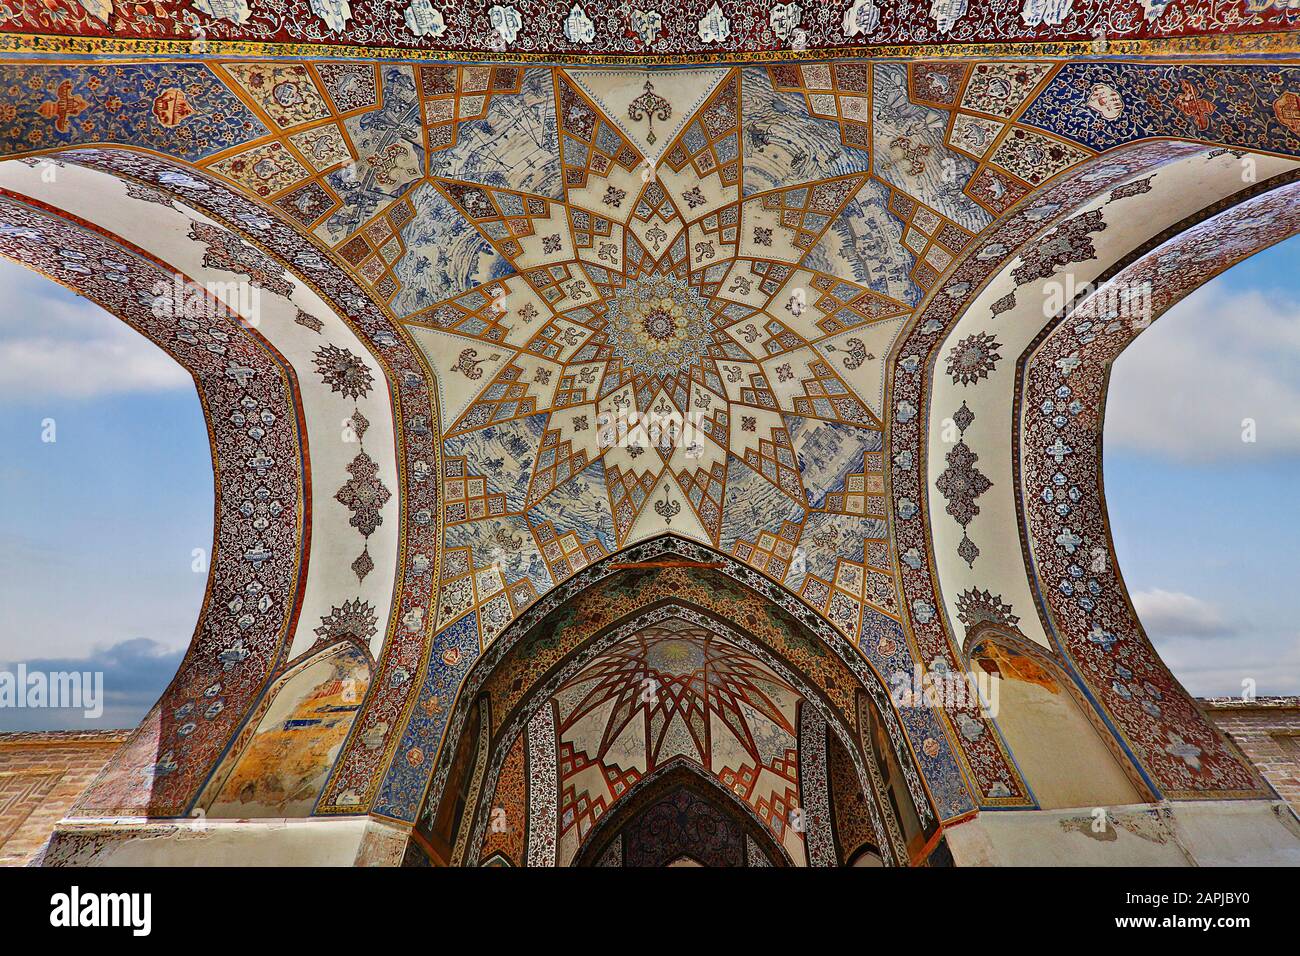 Colurful ceiling decoration in the Fin Gardens, in the city of Kashan, Iran Stock Photo